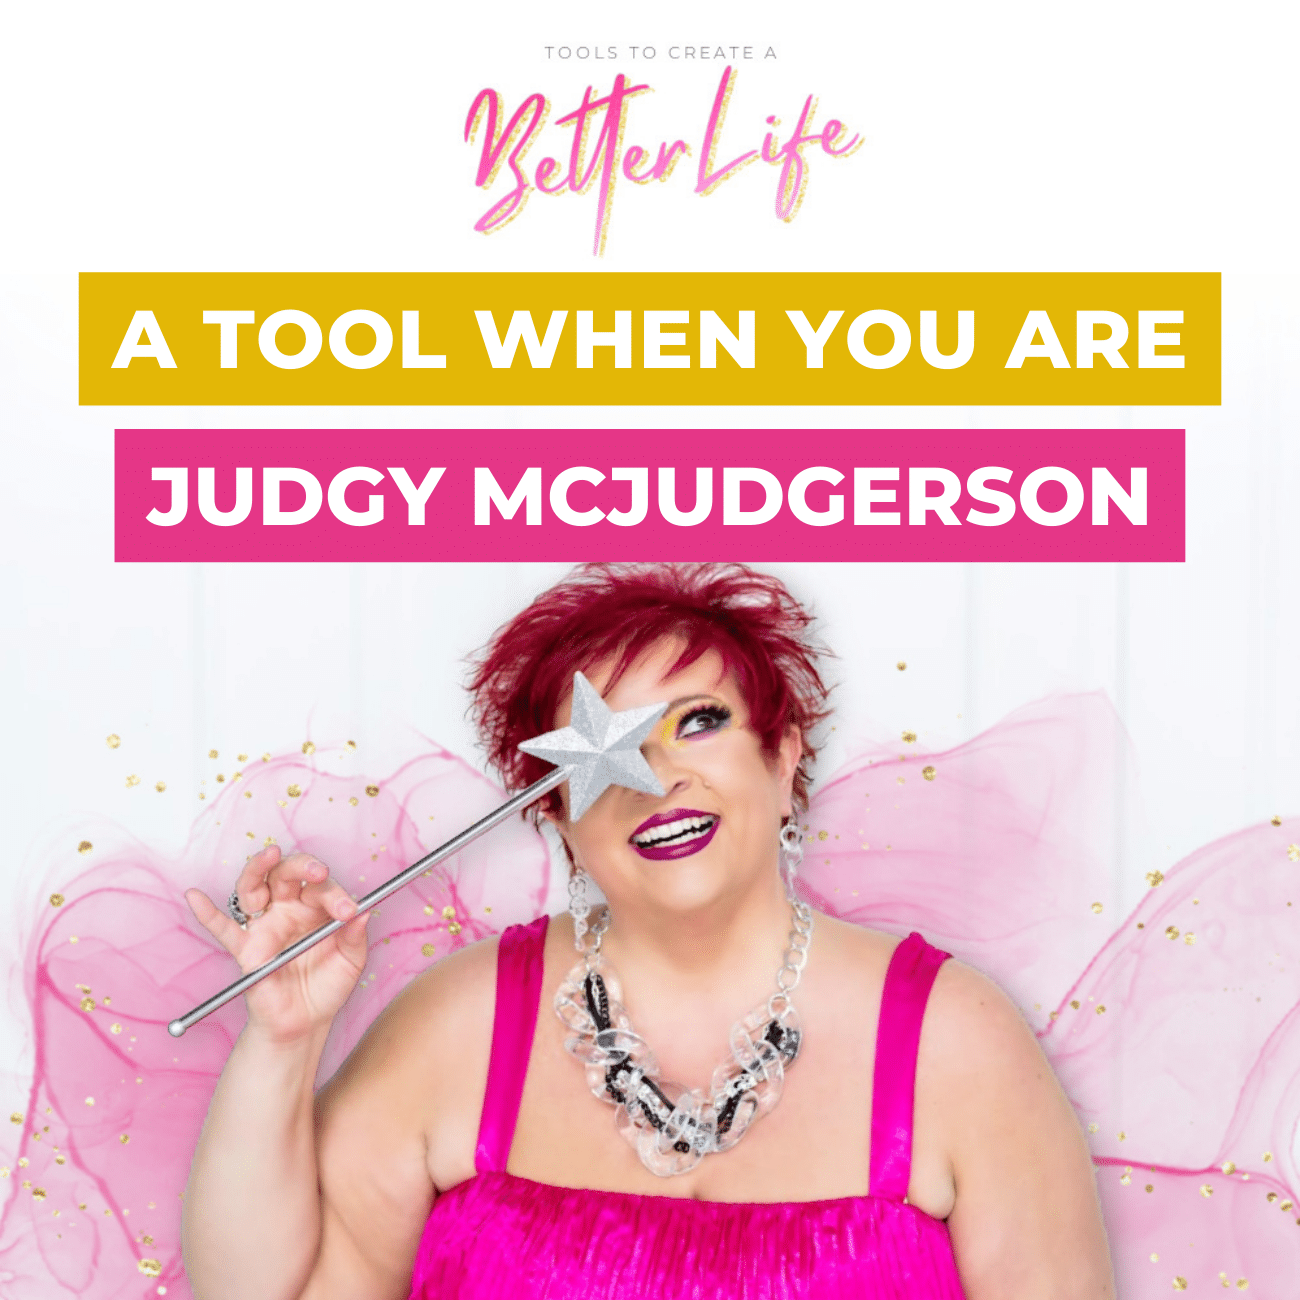 A Tool When You Are Judgy McJudgerson